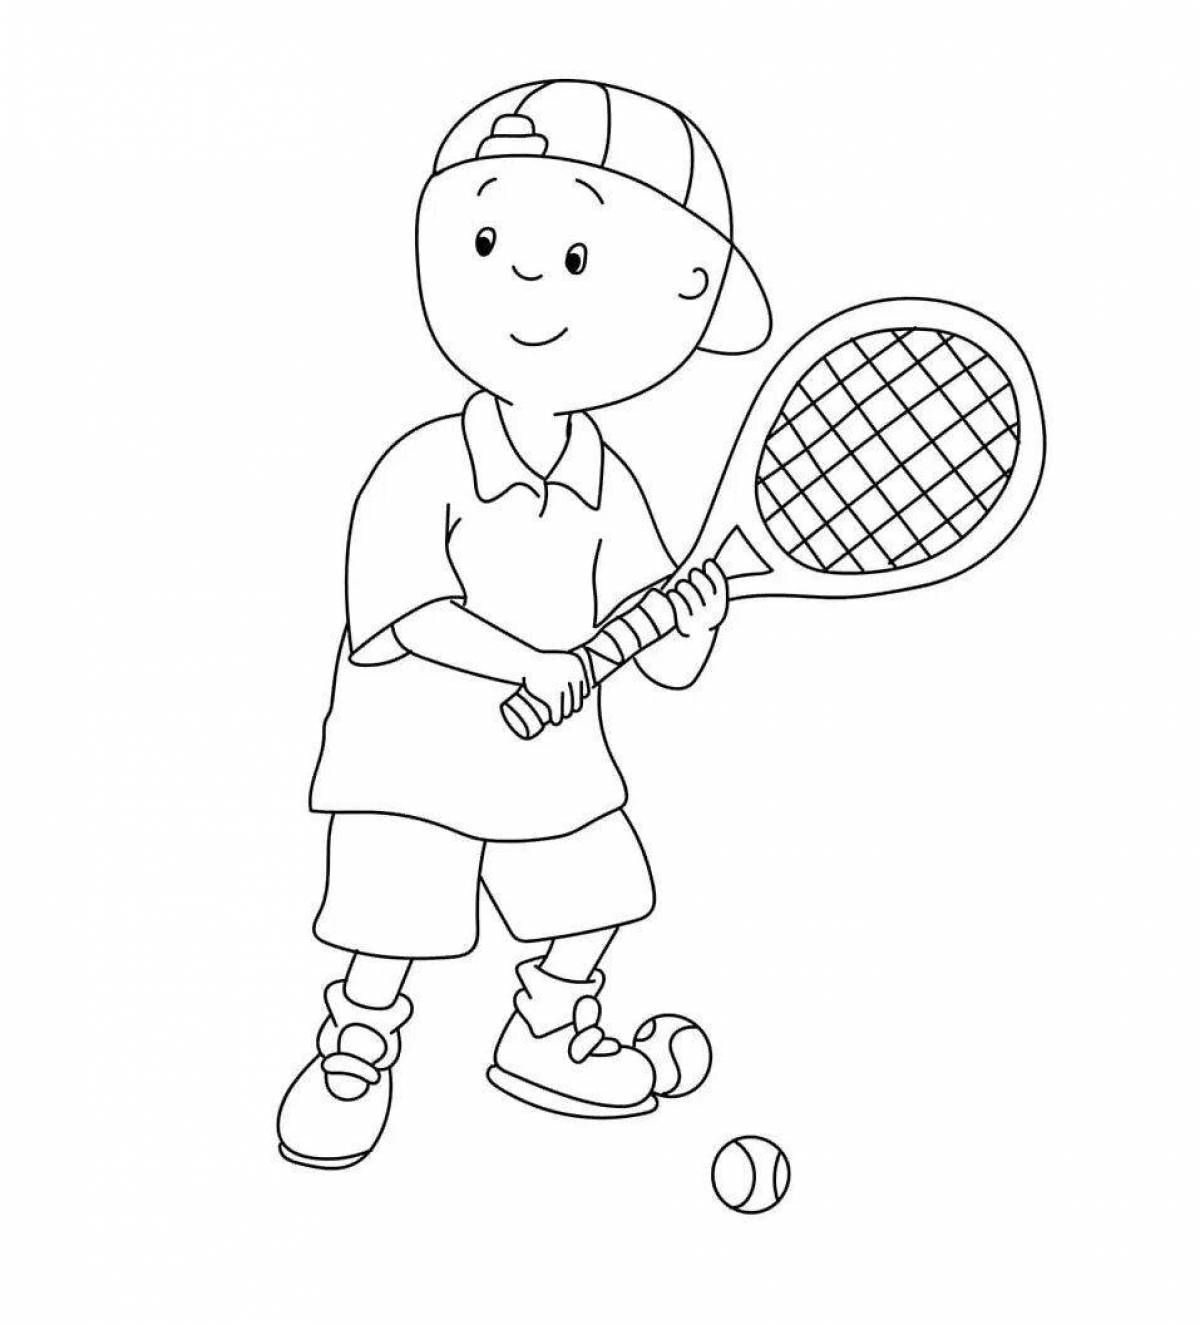 Playful coloring of athletes of different sports for children